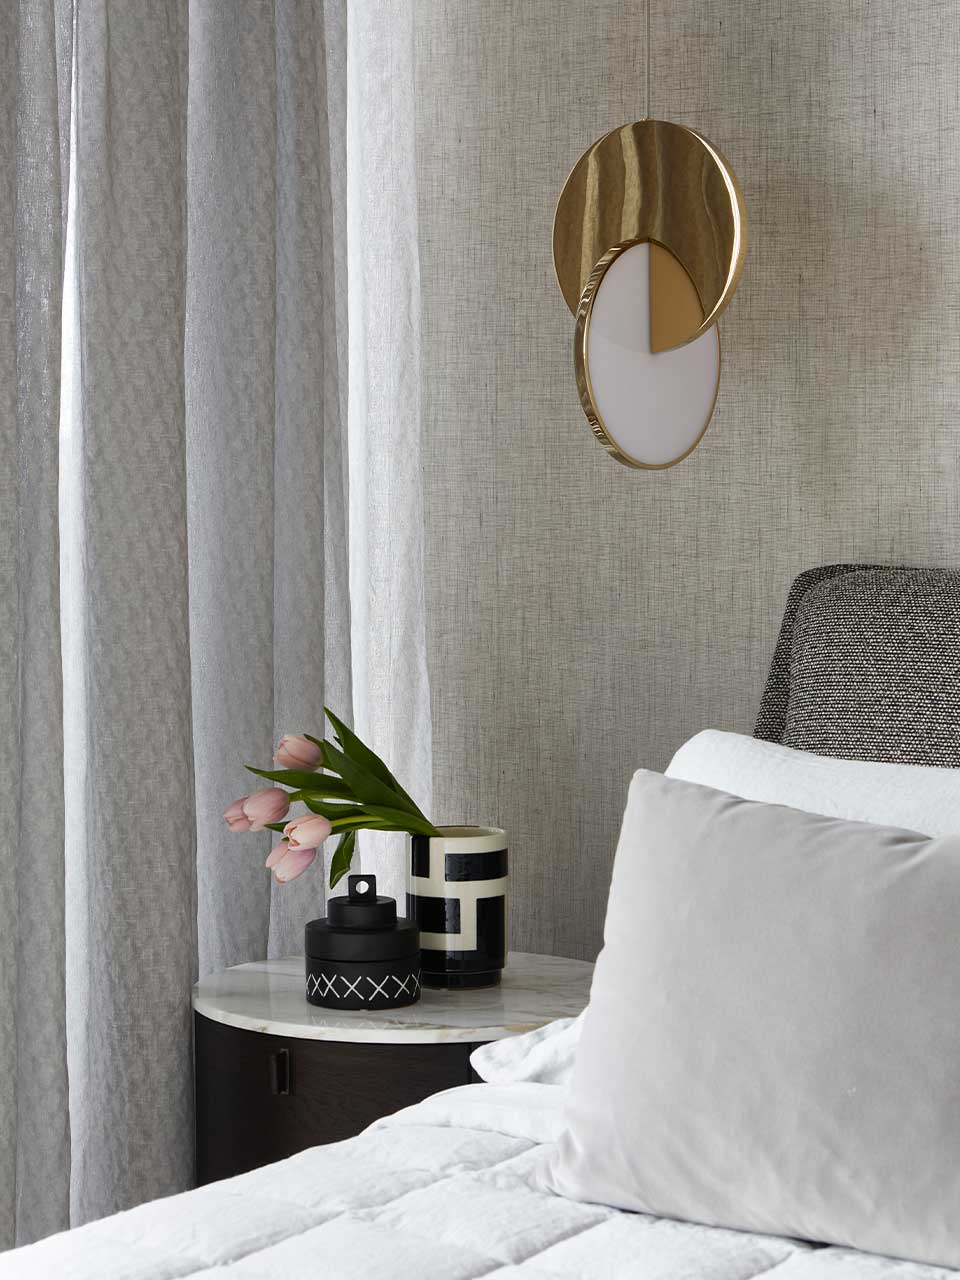 The Lee Broom Eclipse pendant light adds further lustre to the bed and Poliform Onda bedside table.